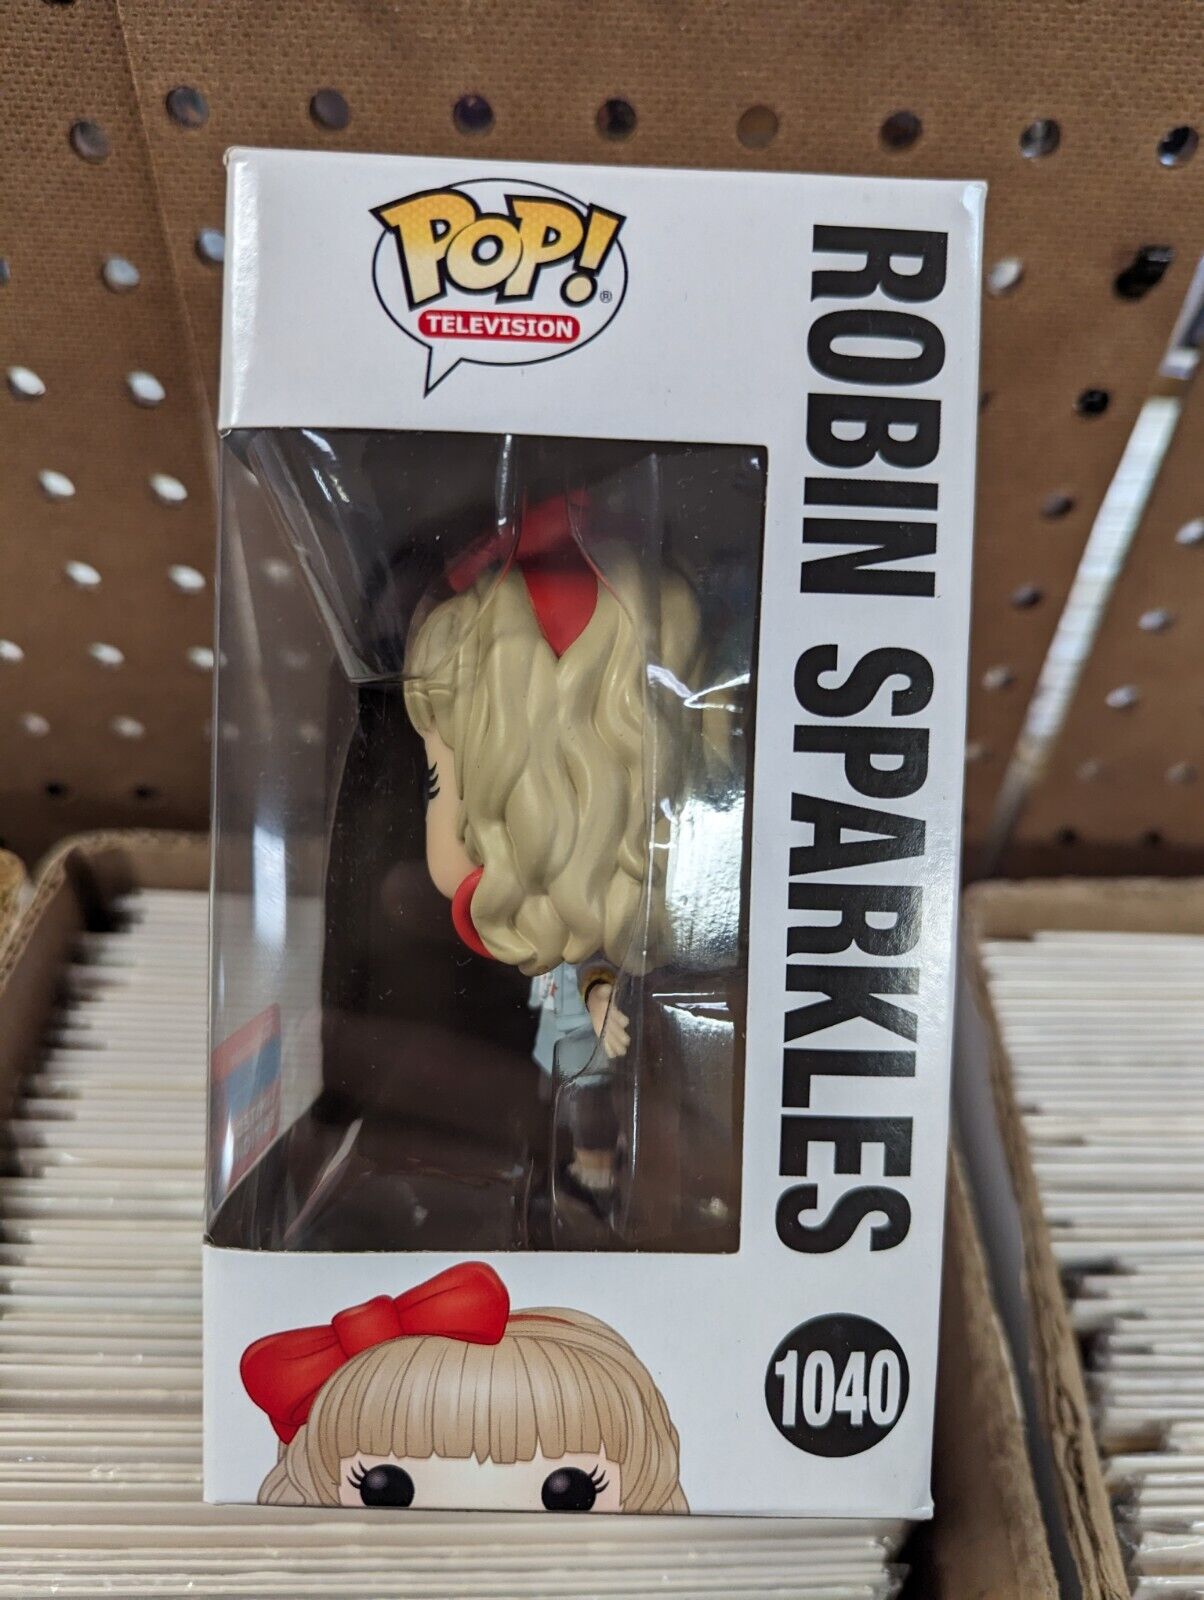 Funko Pop Robin Sparkles 1040 How I Met Your Mother 2020 Fall Convention